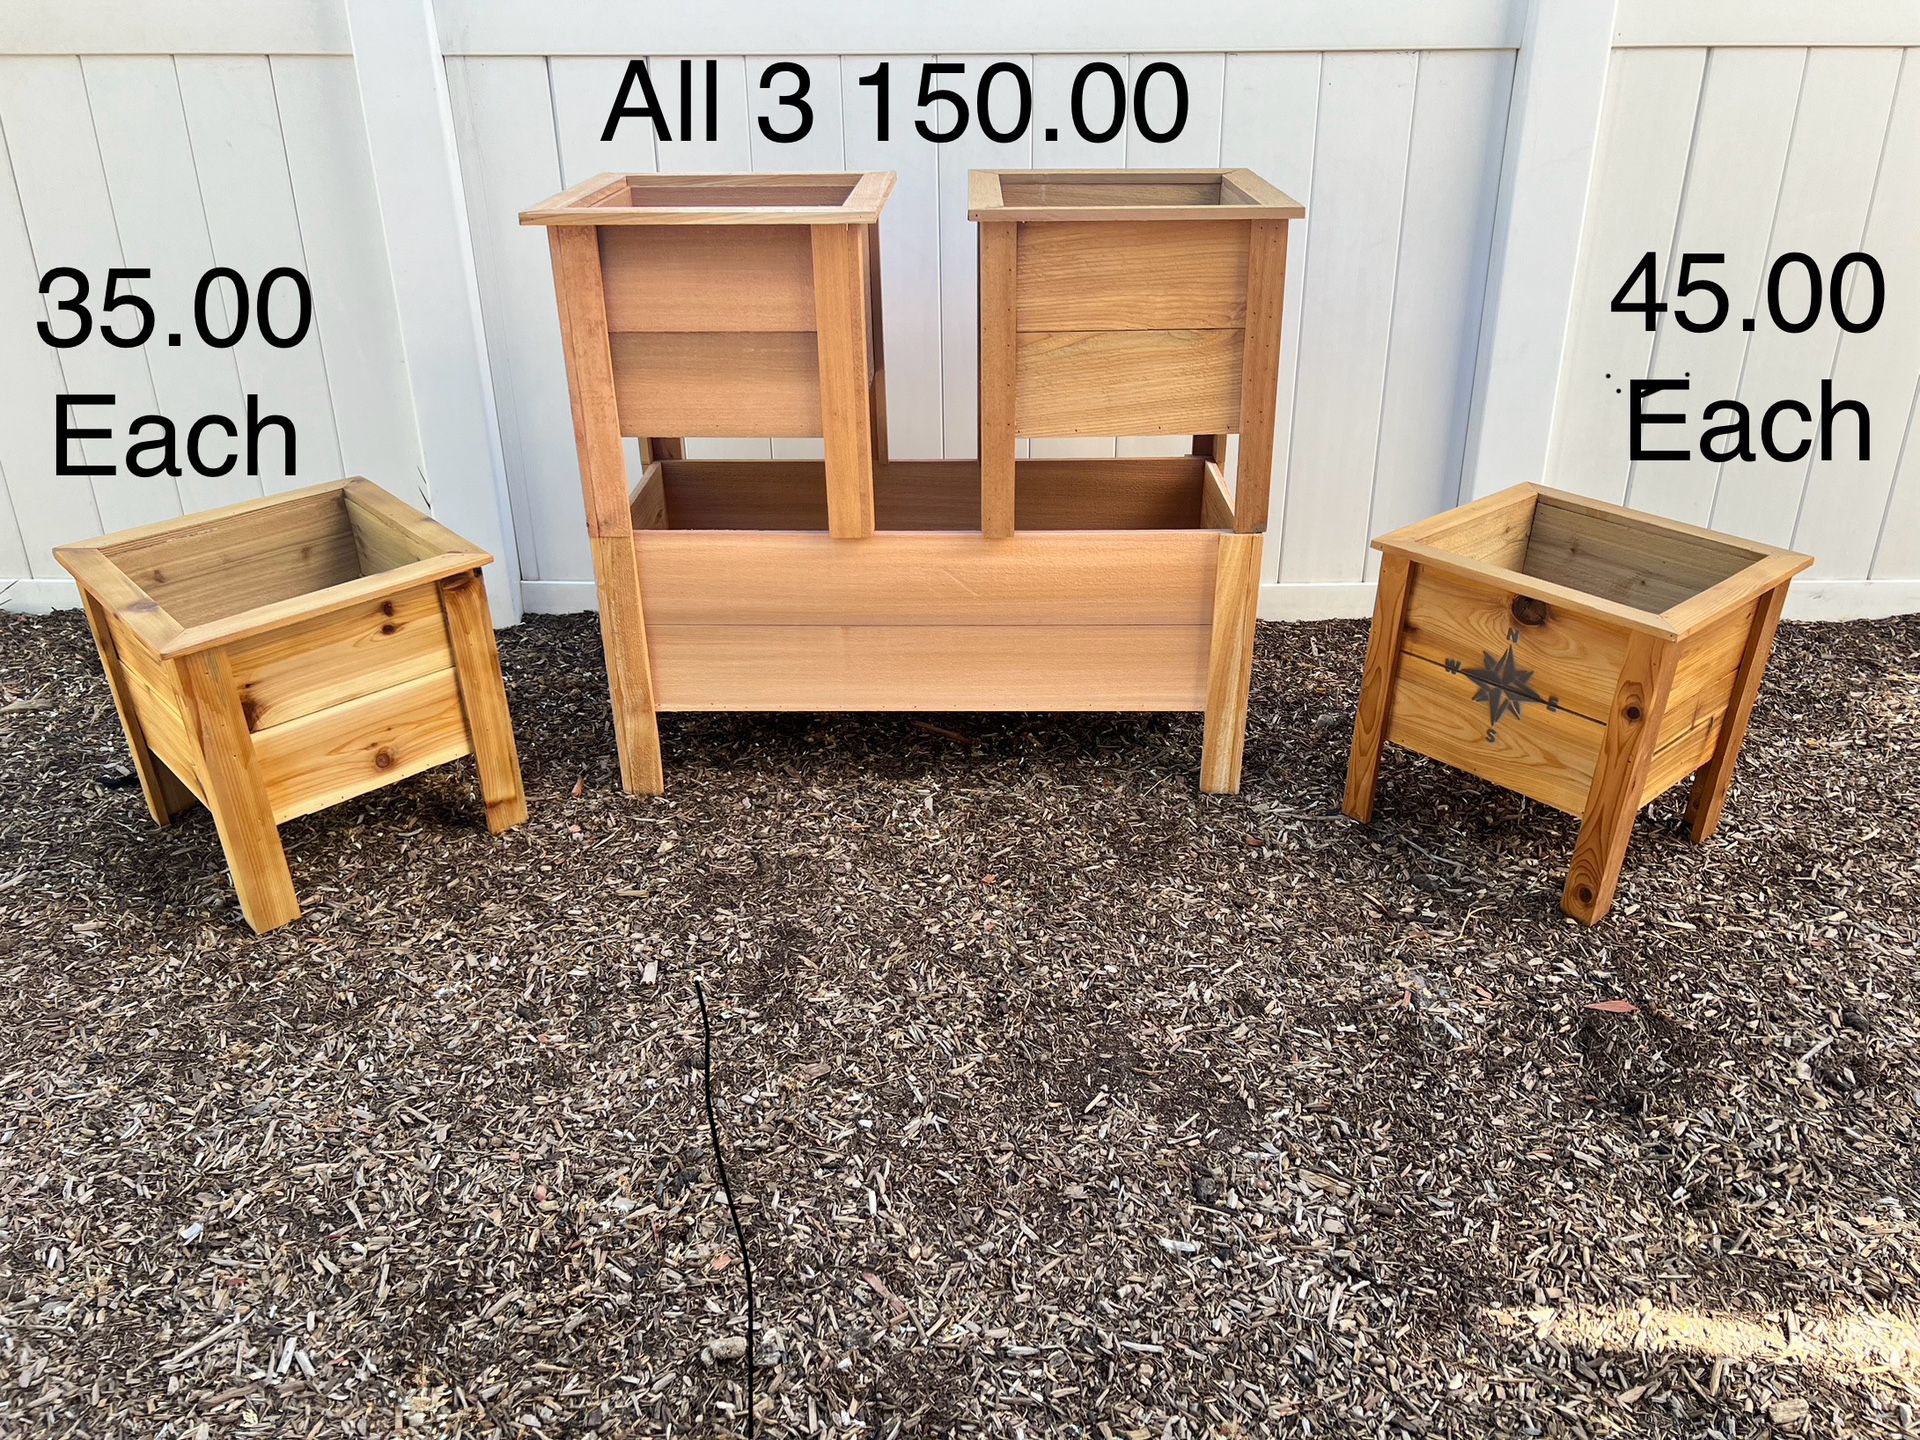 Handcrafted And Custom Made Cedar Planters. 1yr Warranty. Located In The Springs 